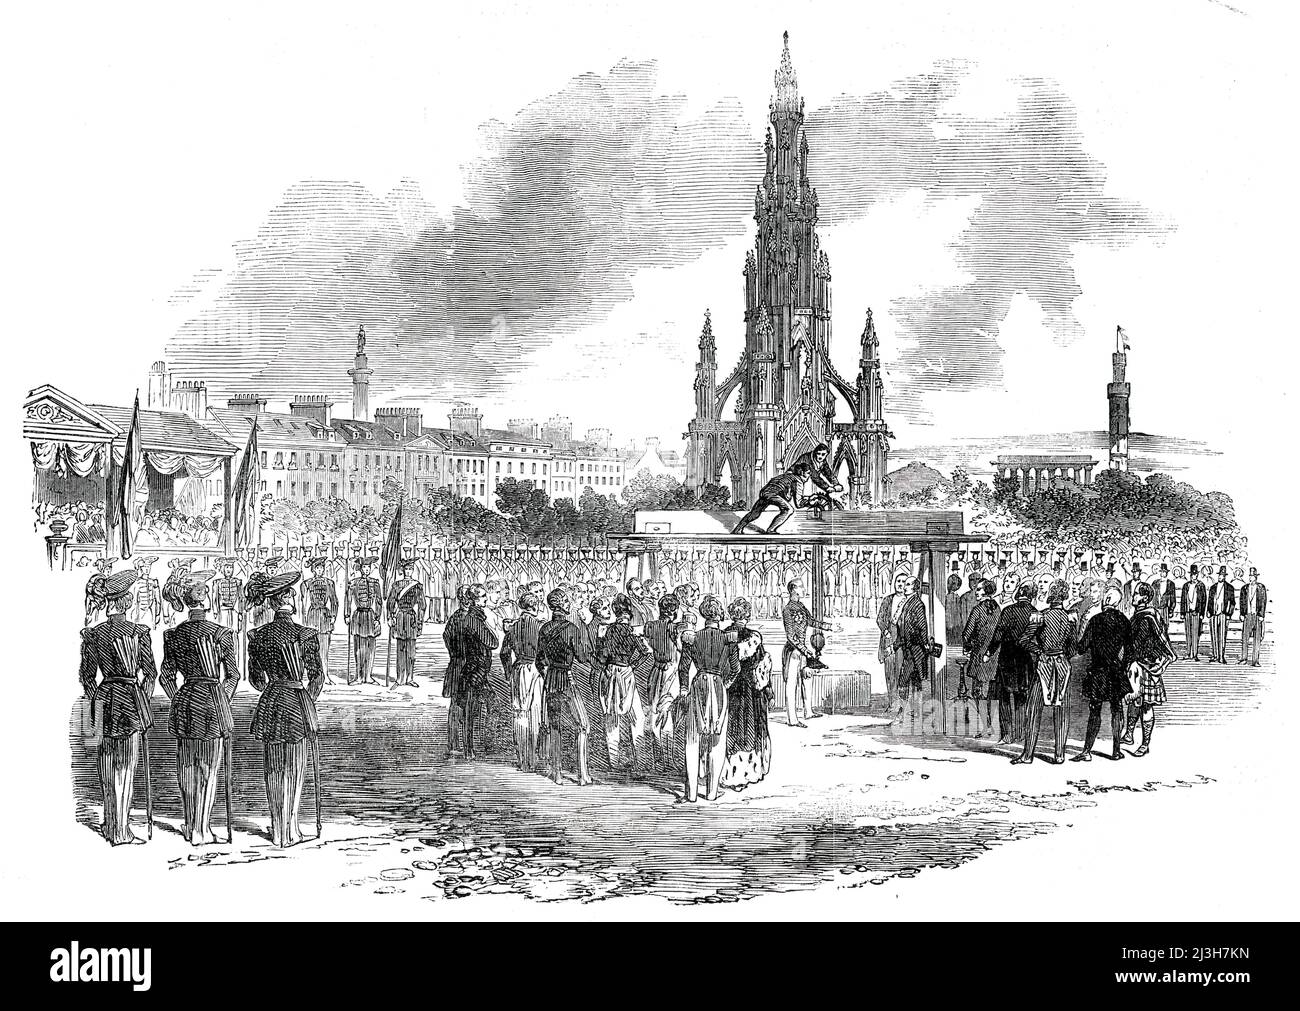 His Royal Highness Prince Albert Laying the Foundation-Stone of the National Gallery, at Edinburgh, 1850. 'The enclosed space had several stands erected within it...On the west side of the area was another stand, capable of containing 1300 persons...the Prince Consort entered the area, and, amidst loud cheers, took up his position close to the foundation-stone. The Rev. Dr. Lee, Principal of the University...offered up a fervent prayer for the success of the proposed edifice....The Lord Justice-General then advanced, and taking up the trowel, which he afterwards presented to the Prince, addres Stock Photo